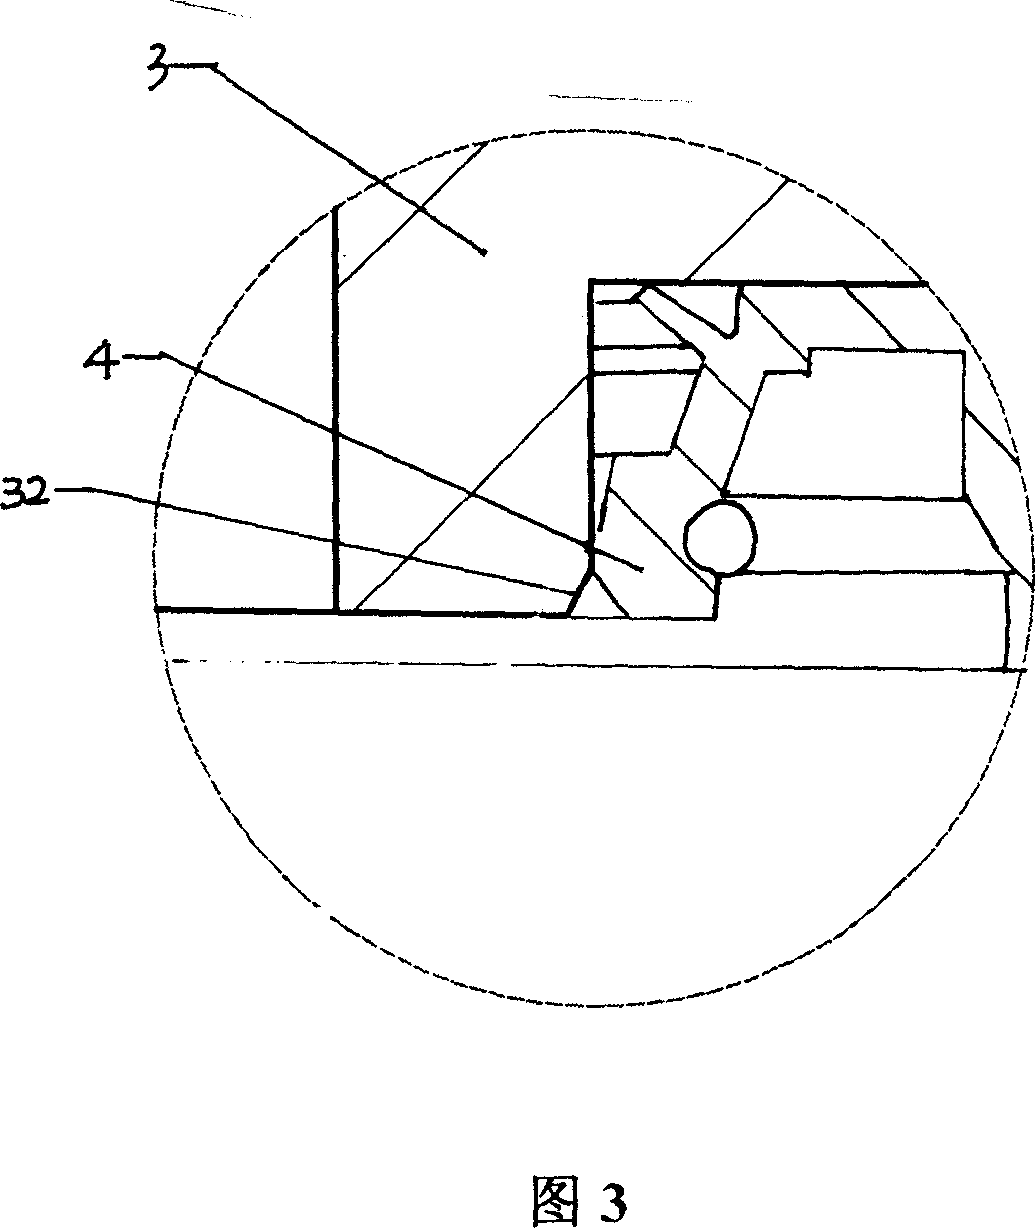 Tool for pressed assembling of rear oil seal of carnkshaft of engine